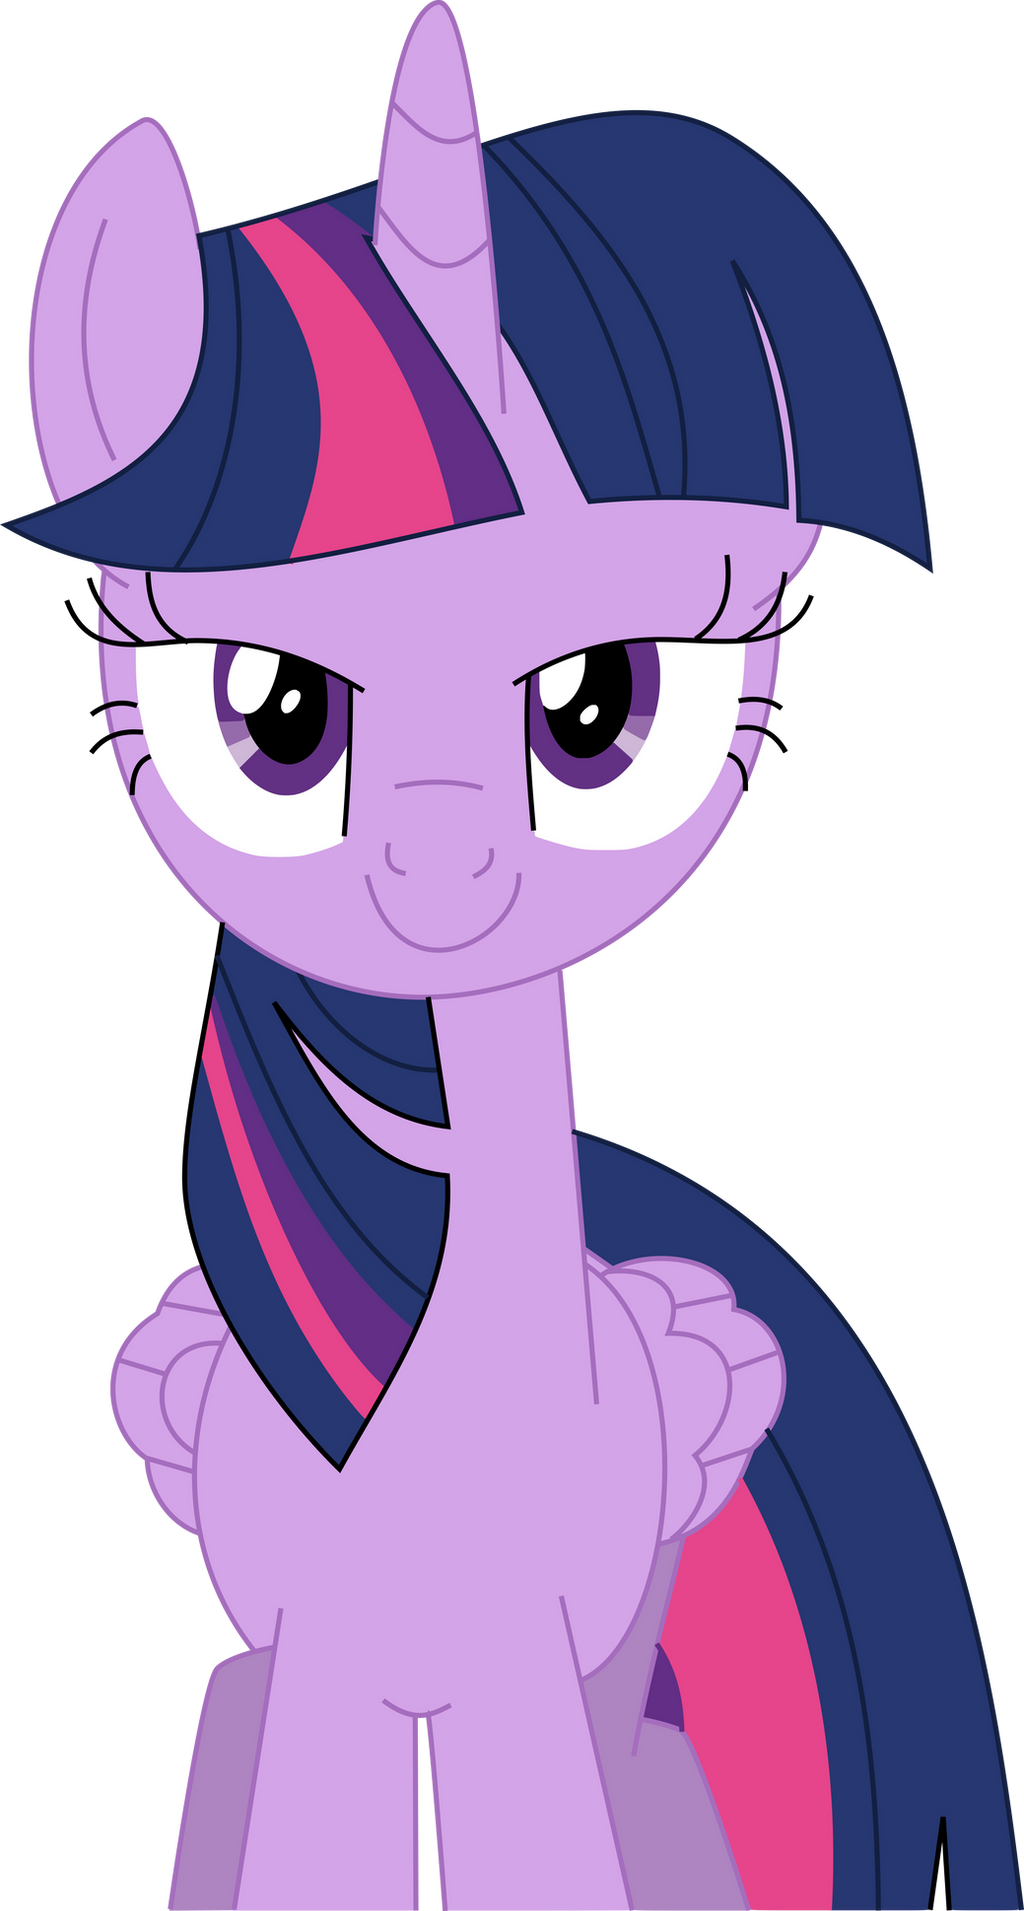 Pin on MLP Pictures